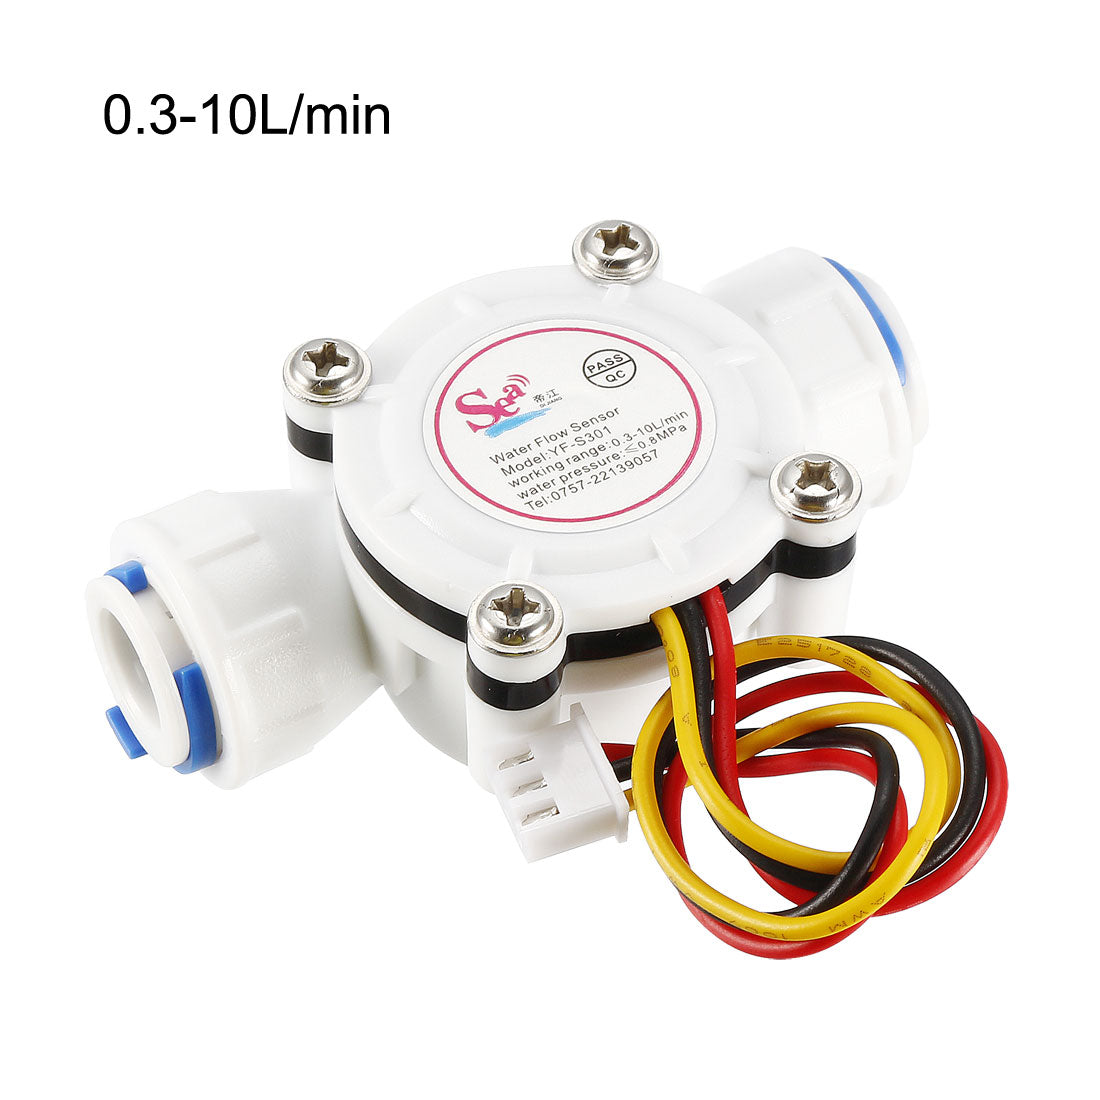 uxcell Uxcell 3/8in Quick Connect Hall Effect Liquid Water Flow Sensor Switch Flowmeter Meter DC5V 0.3-10L/min YF-S301